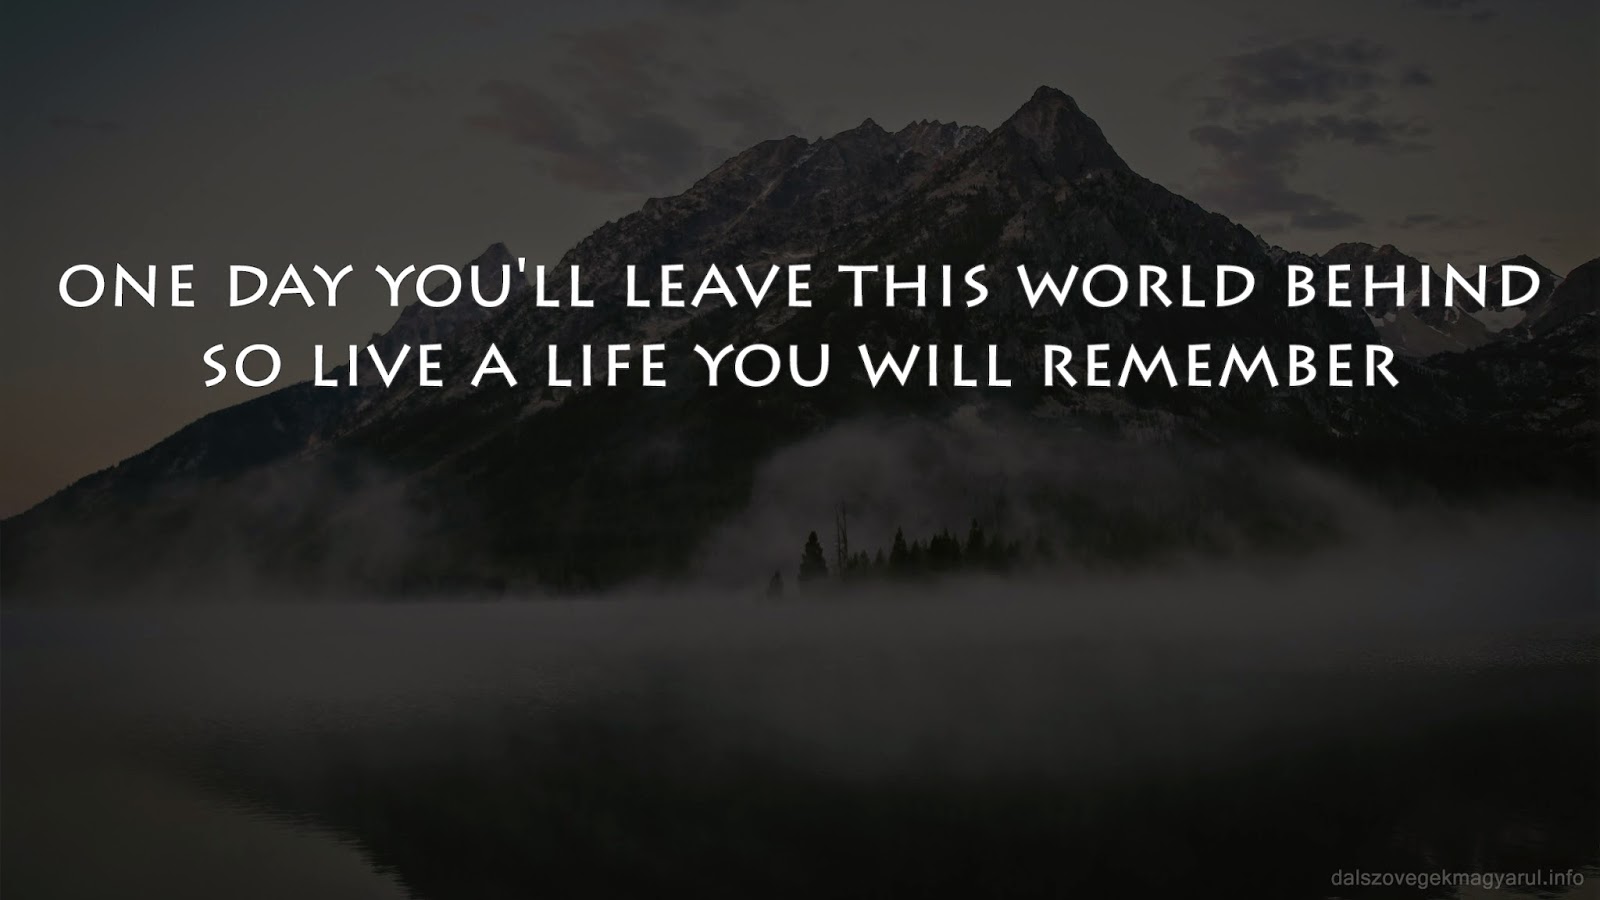 This life you need. So Live a Life you will remember. Live a Life you will remember. Avicii Live a Life you will remember. One Day you'll leave this World behind, so Live a Life you will remember.